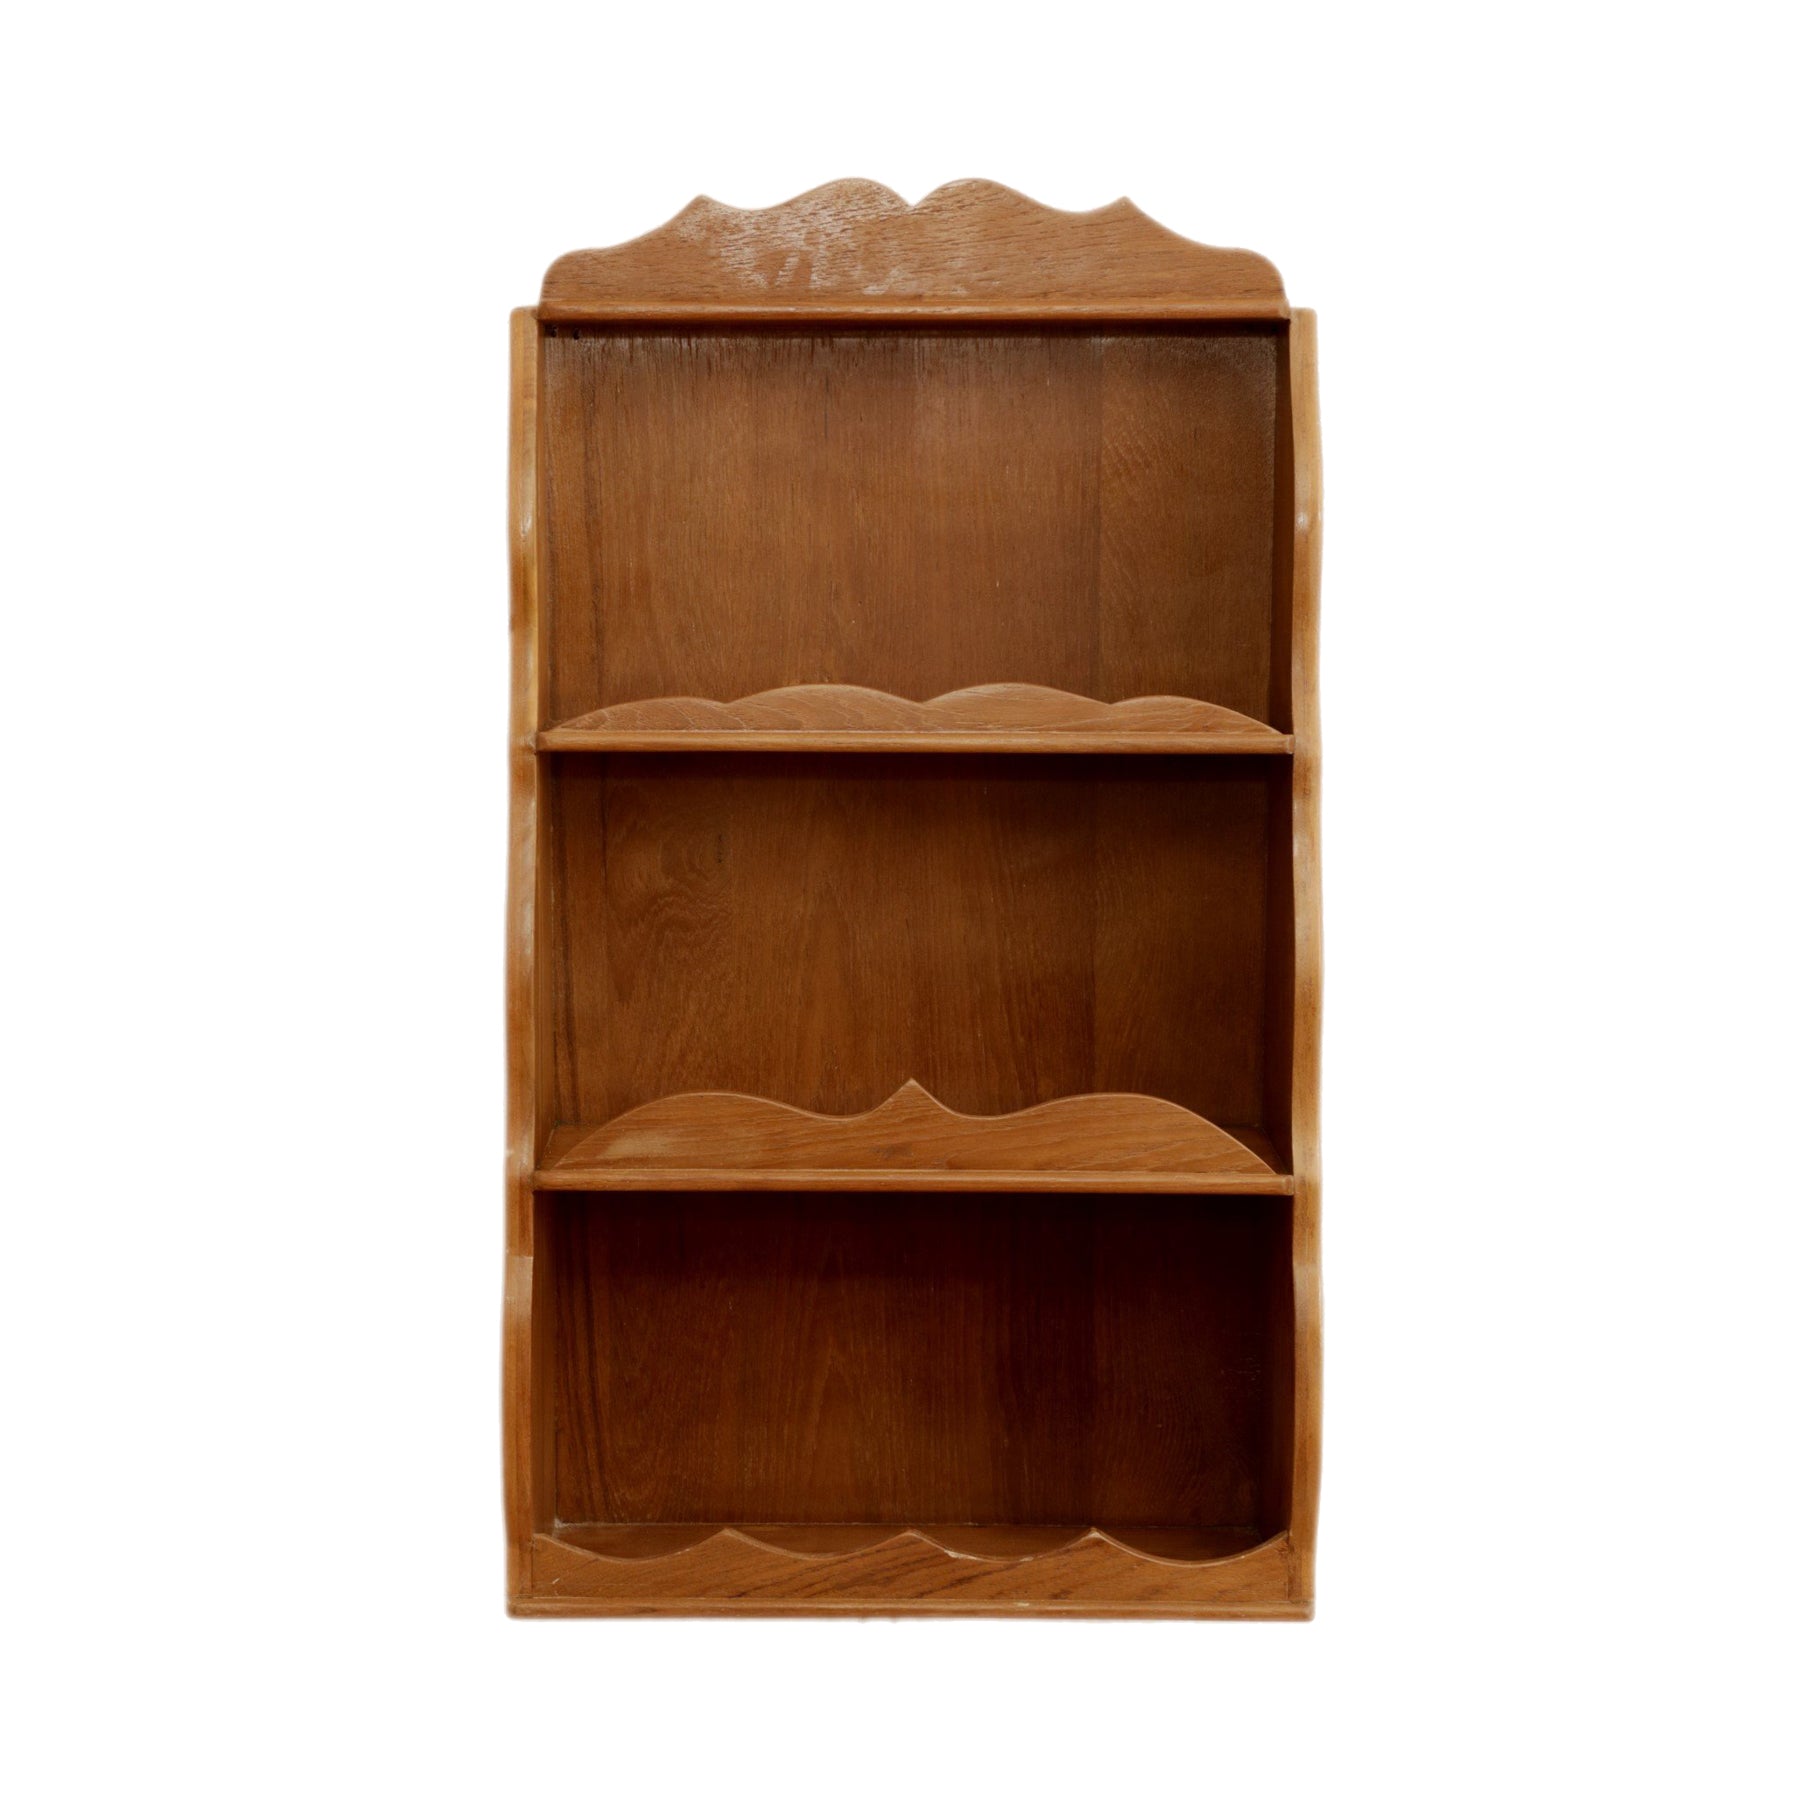 Wall Mounted Carved Shelf (Natural Tone) Book Rack